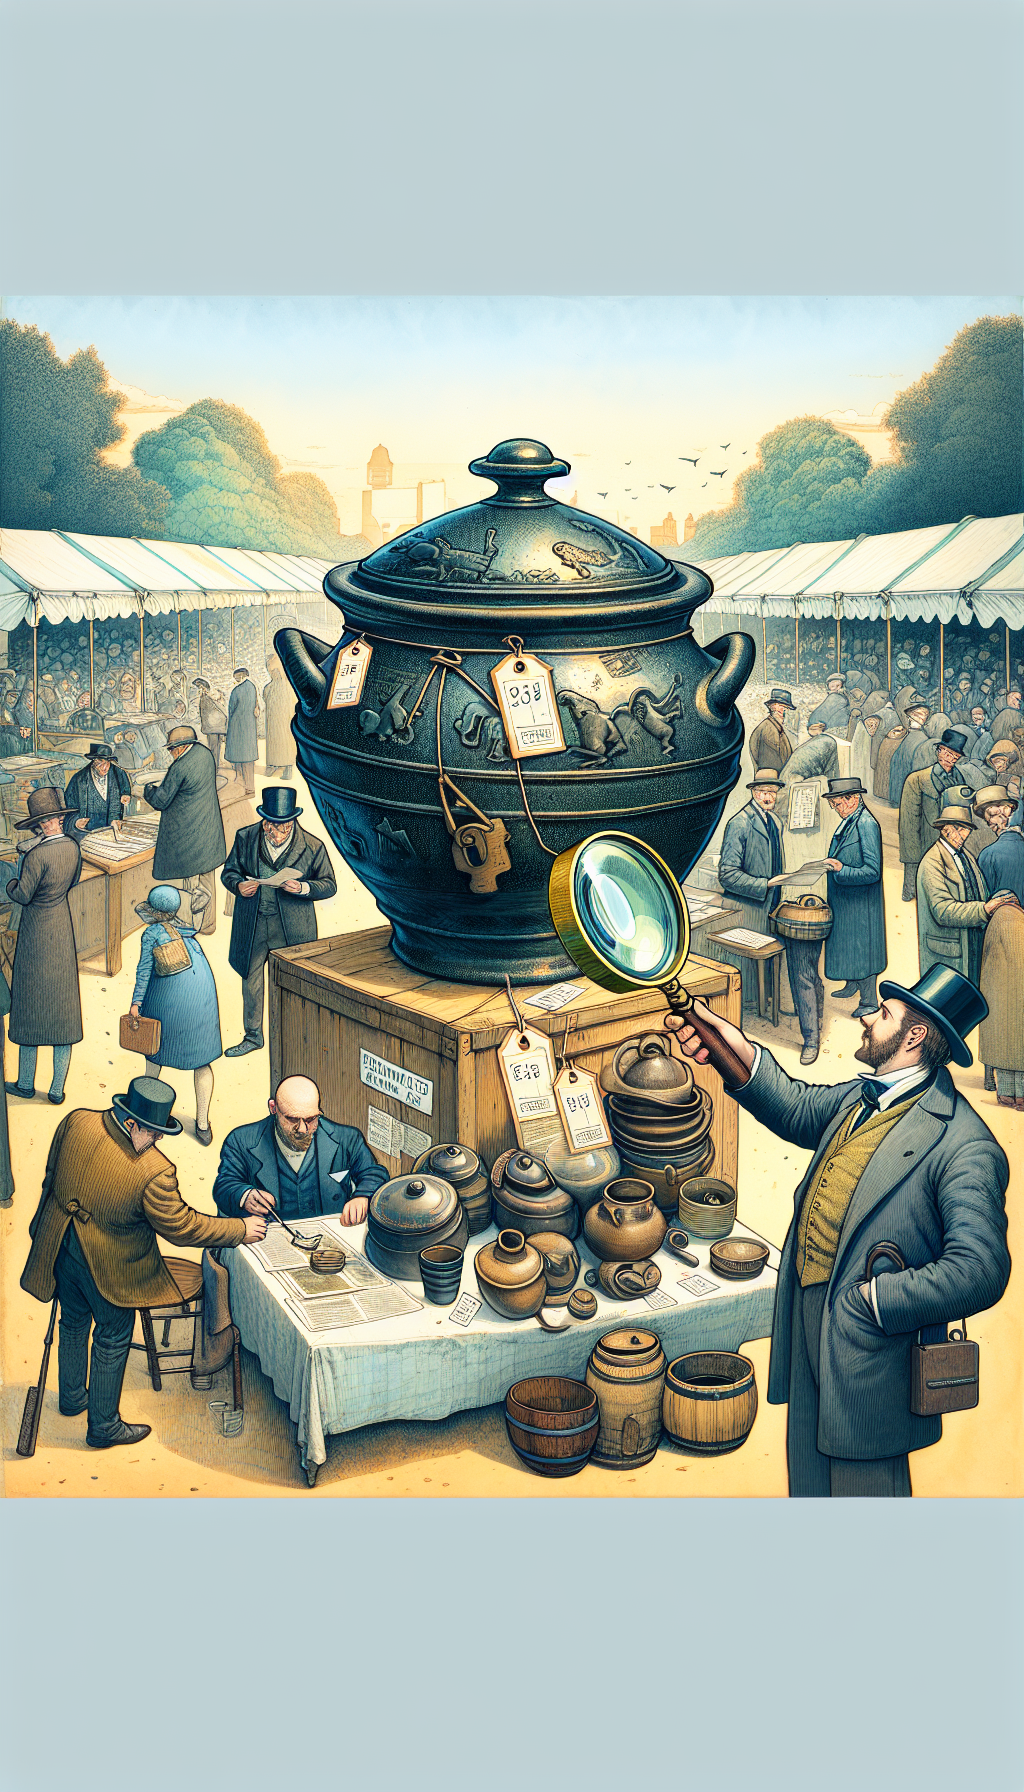 An illustrated antique market scene with vendors and buyers clustered around a prominent, detailed 10-gallon crock, highlighted by a whimsical magnifying glass showcasing price tags. Diverse styles, from watercolor backgrounds to a caricatured auctioneer with a gavel, merge to embody the eclectic valuation process of these historical treasures.